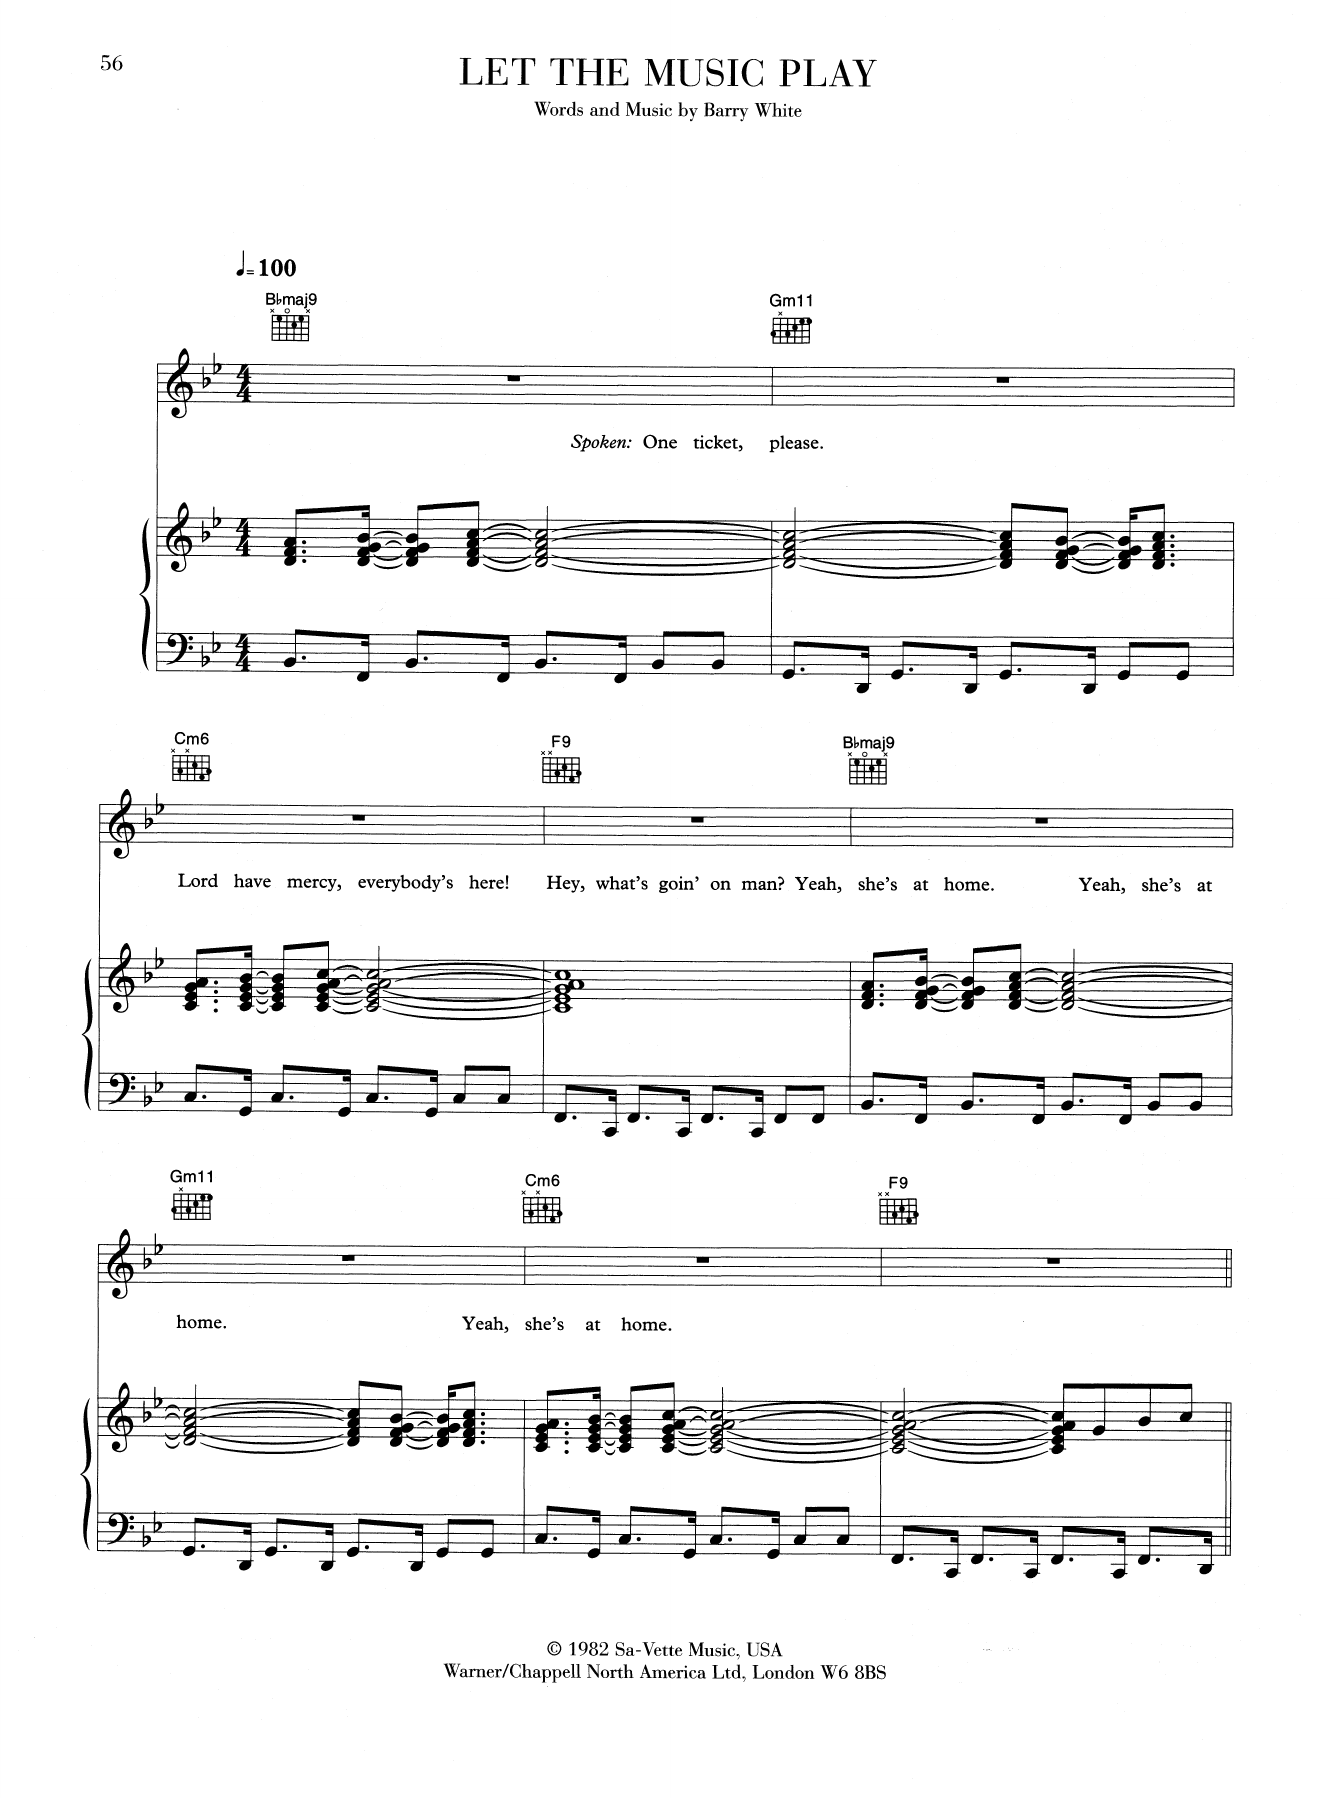 Download Barry White Let The Music Play Sheet Music